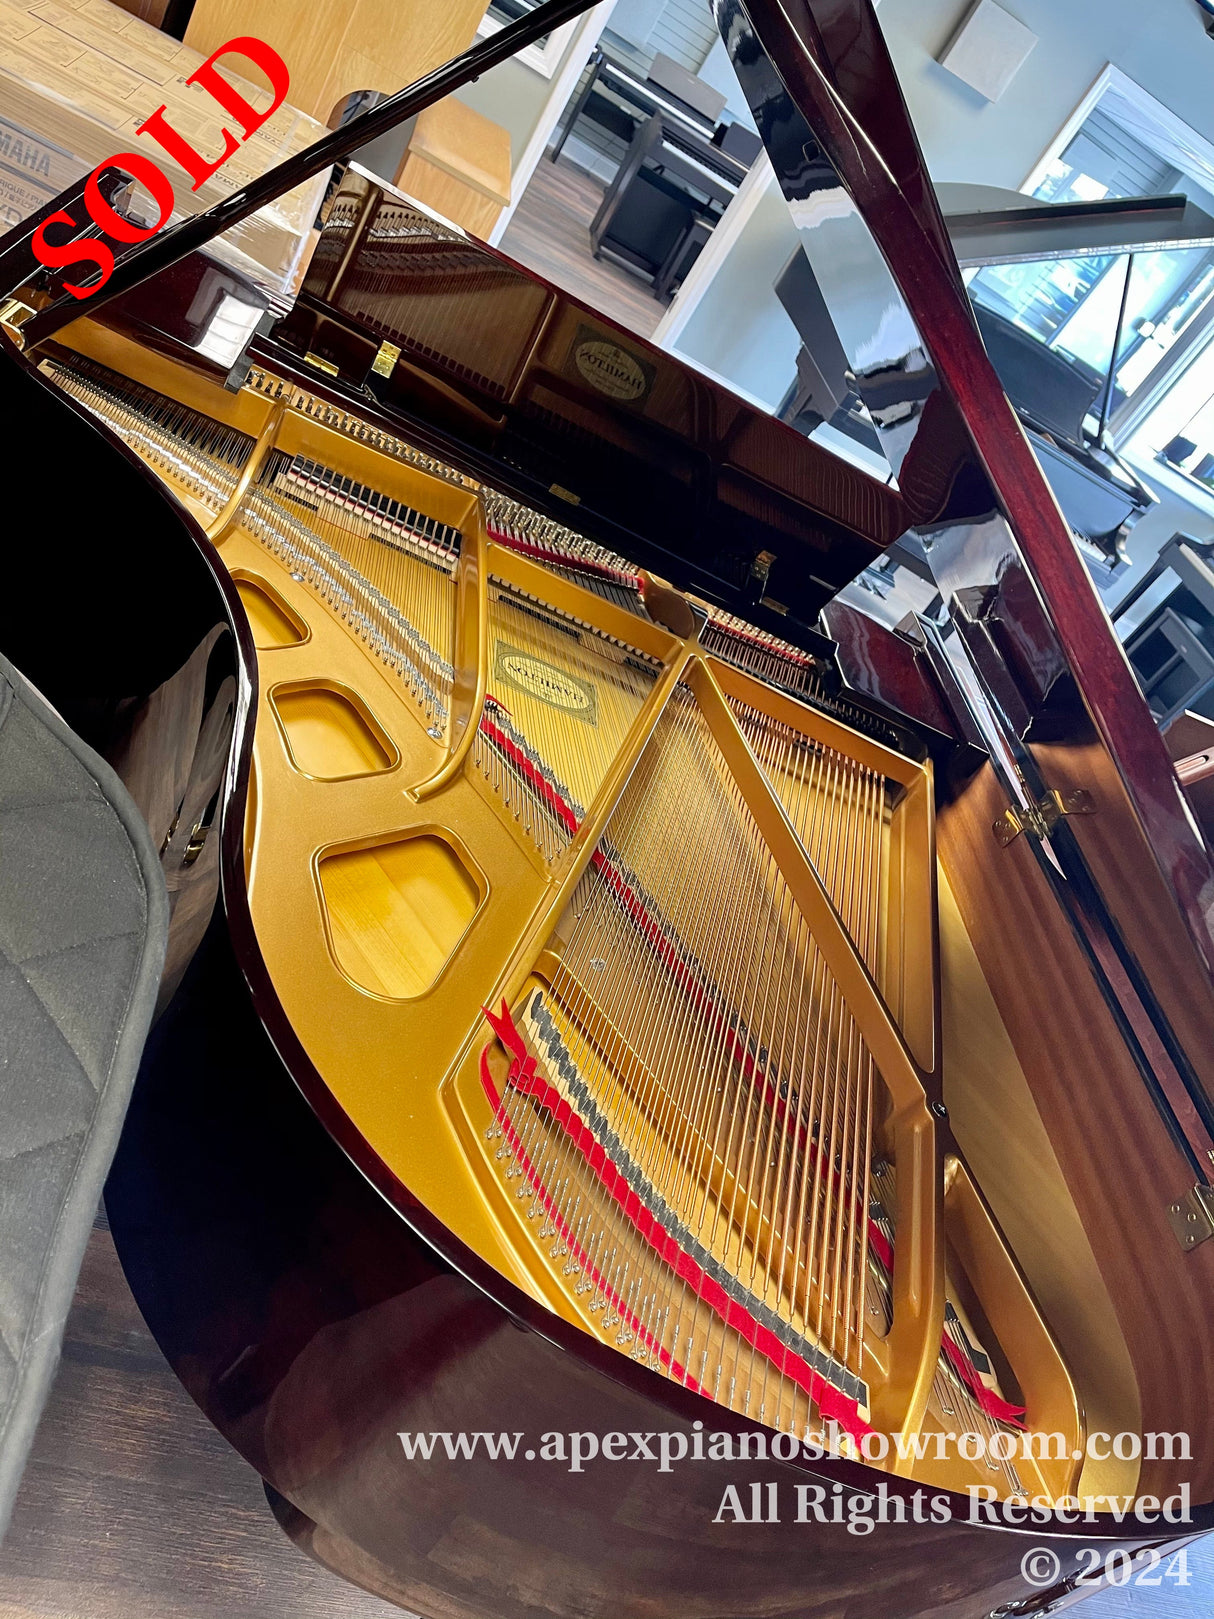 Interior view of a grand piano showing gold-colored frame and strings, ebony polished finish, and the opened lid reflecting a bright room environment.